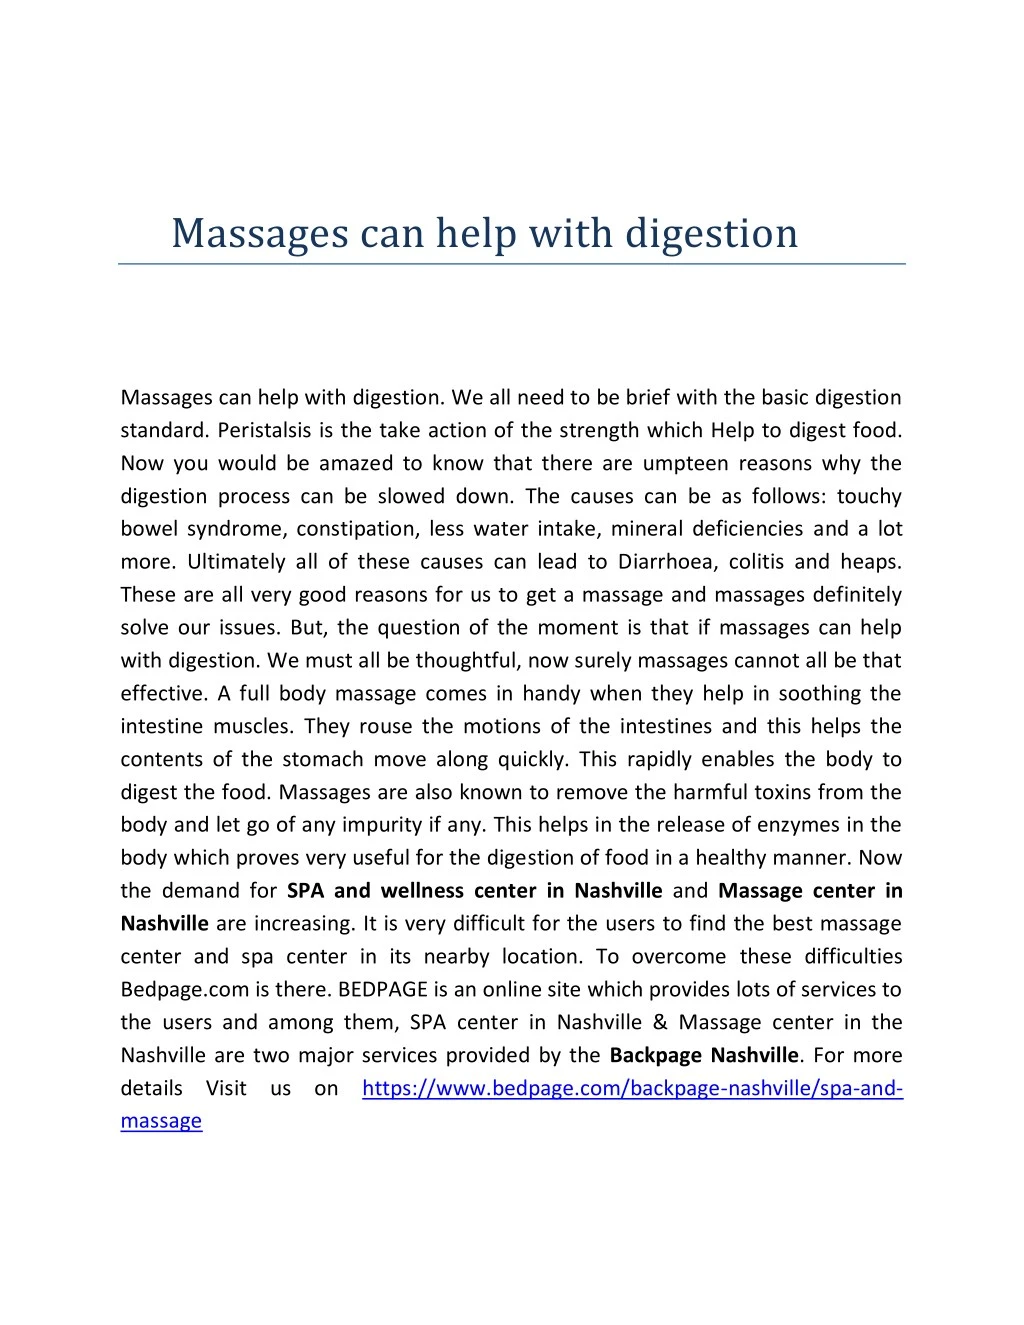 massages can help with digestion